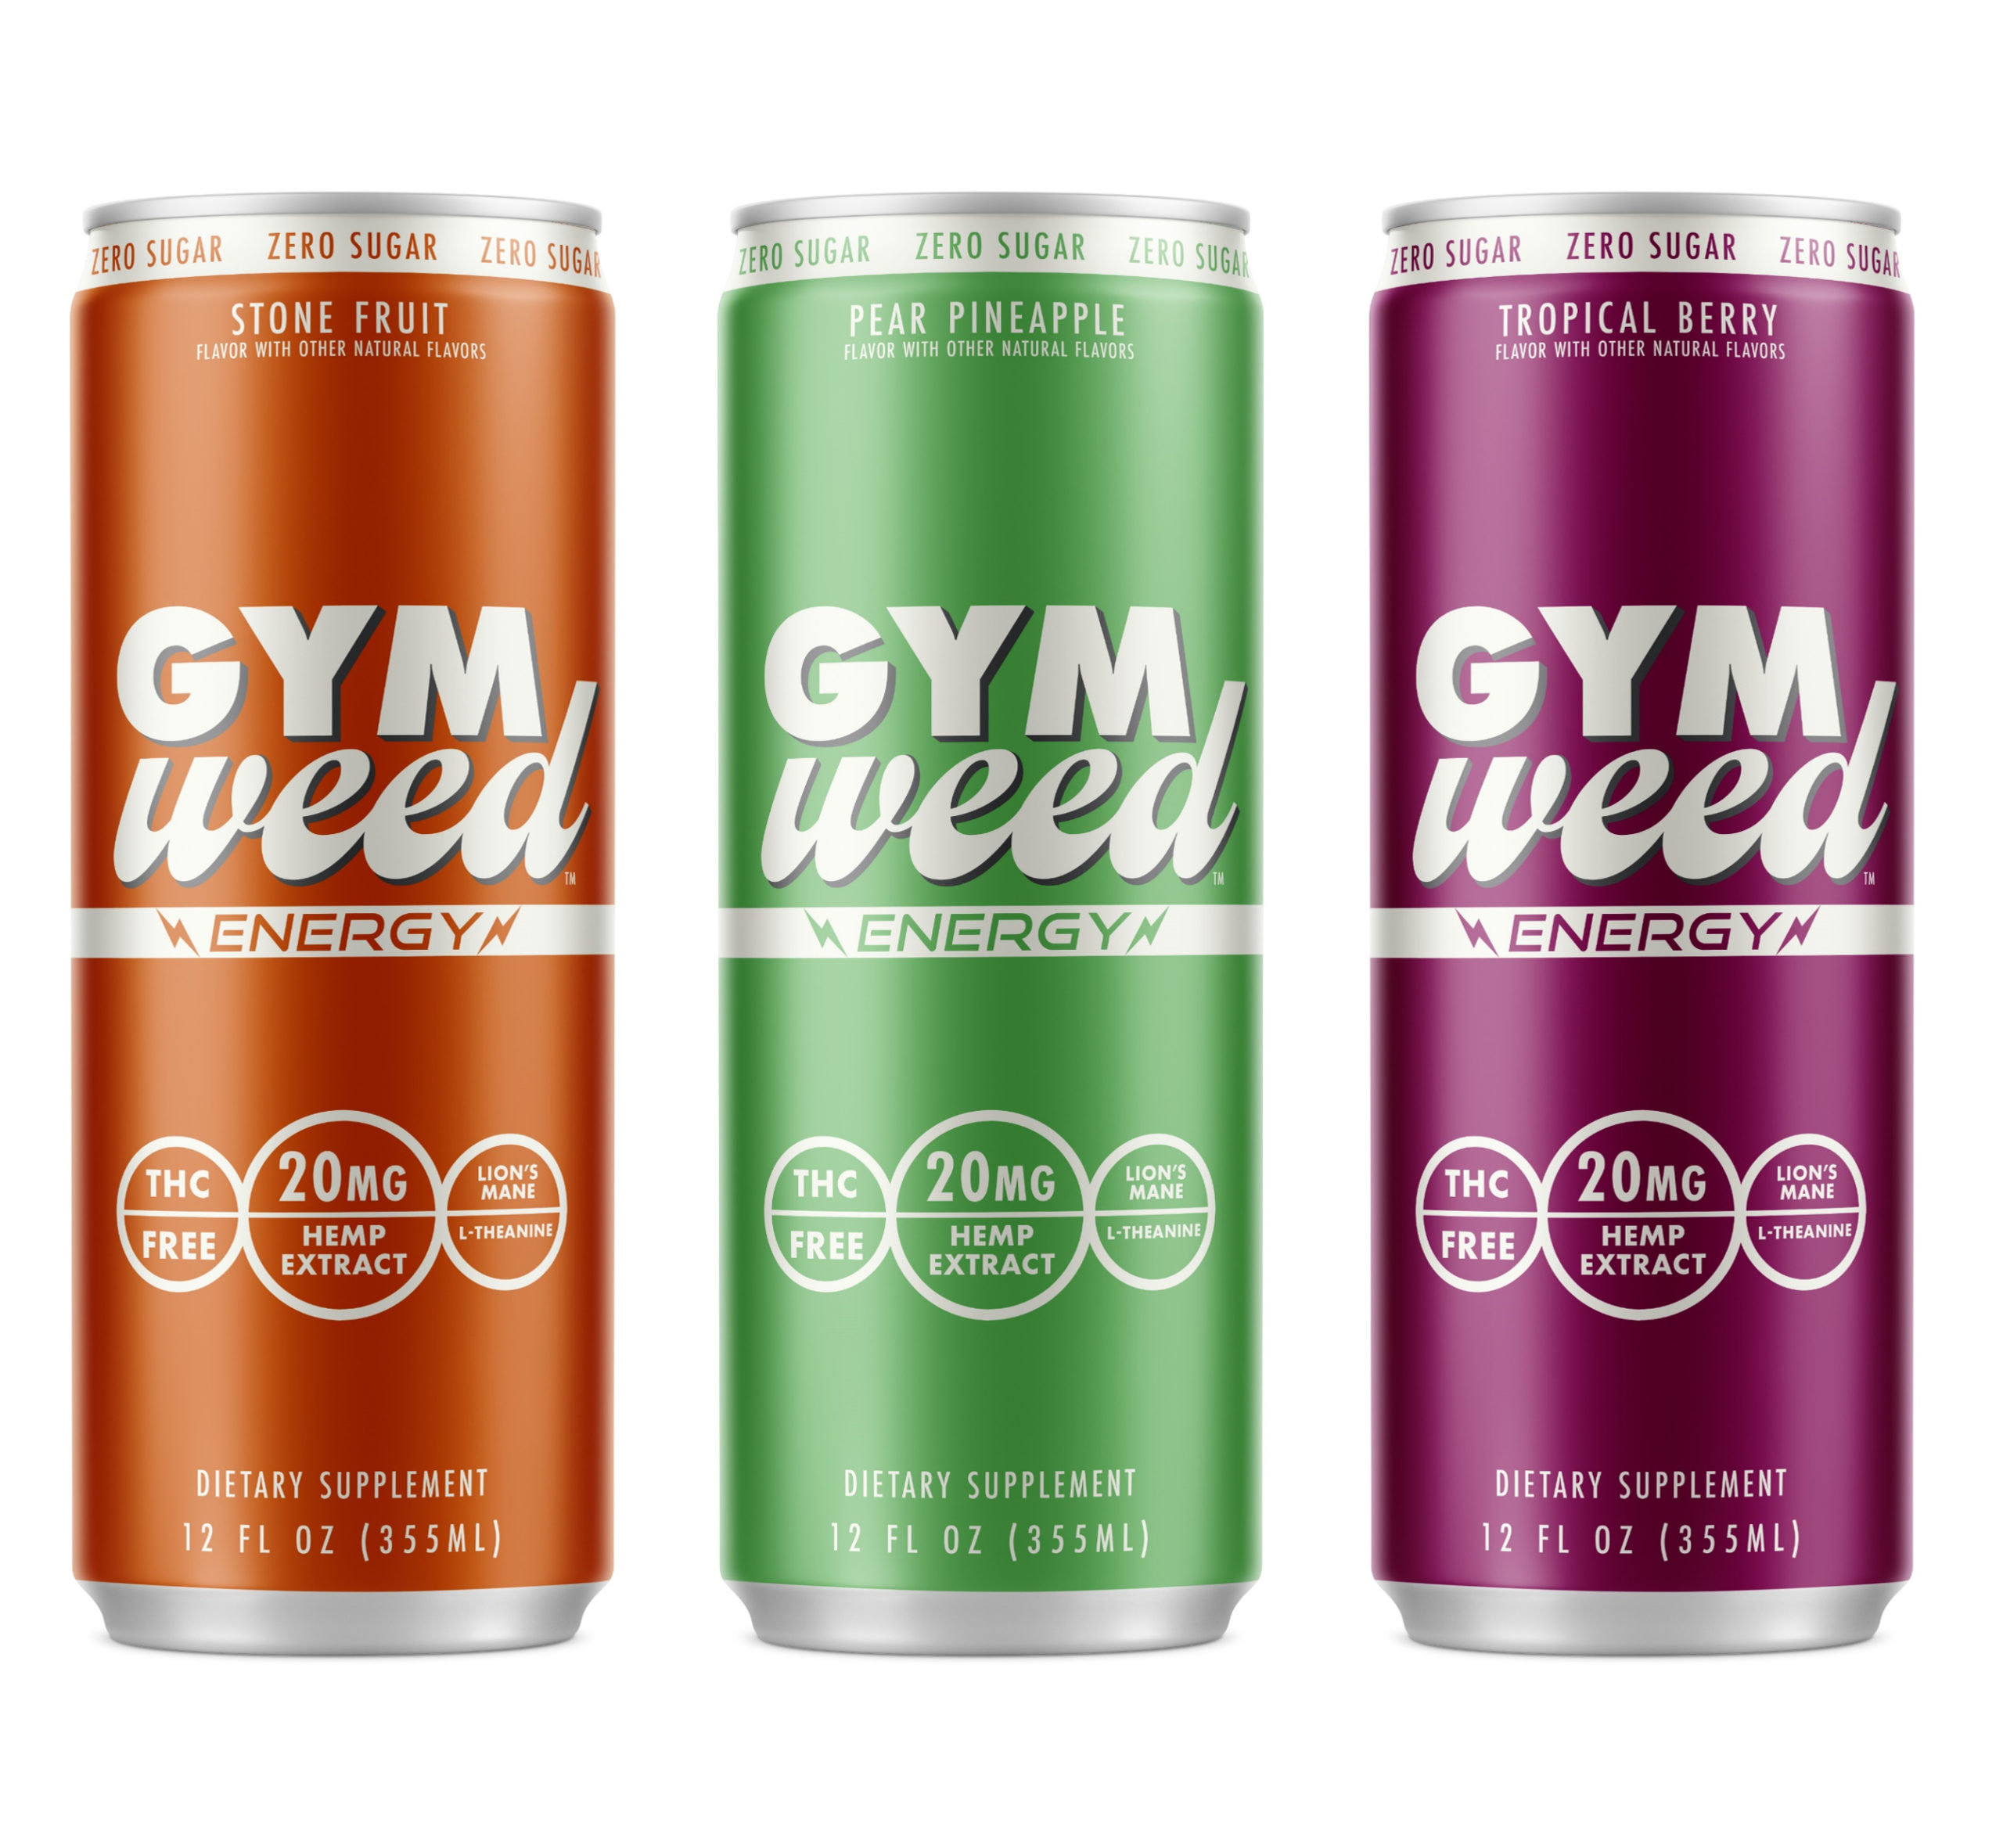 Muscle Milk Releases New Energy Drink 'Gym Weed'